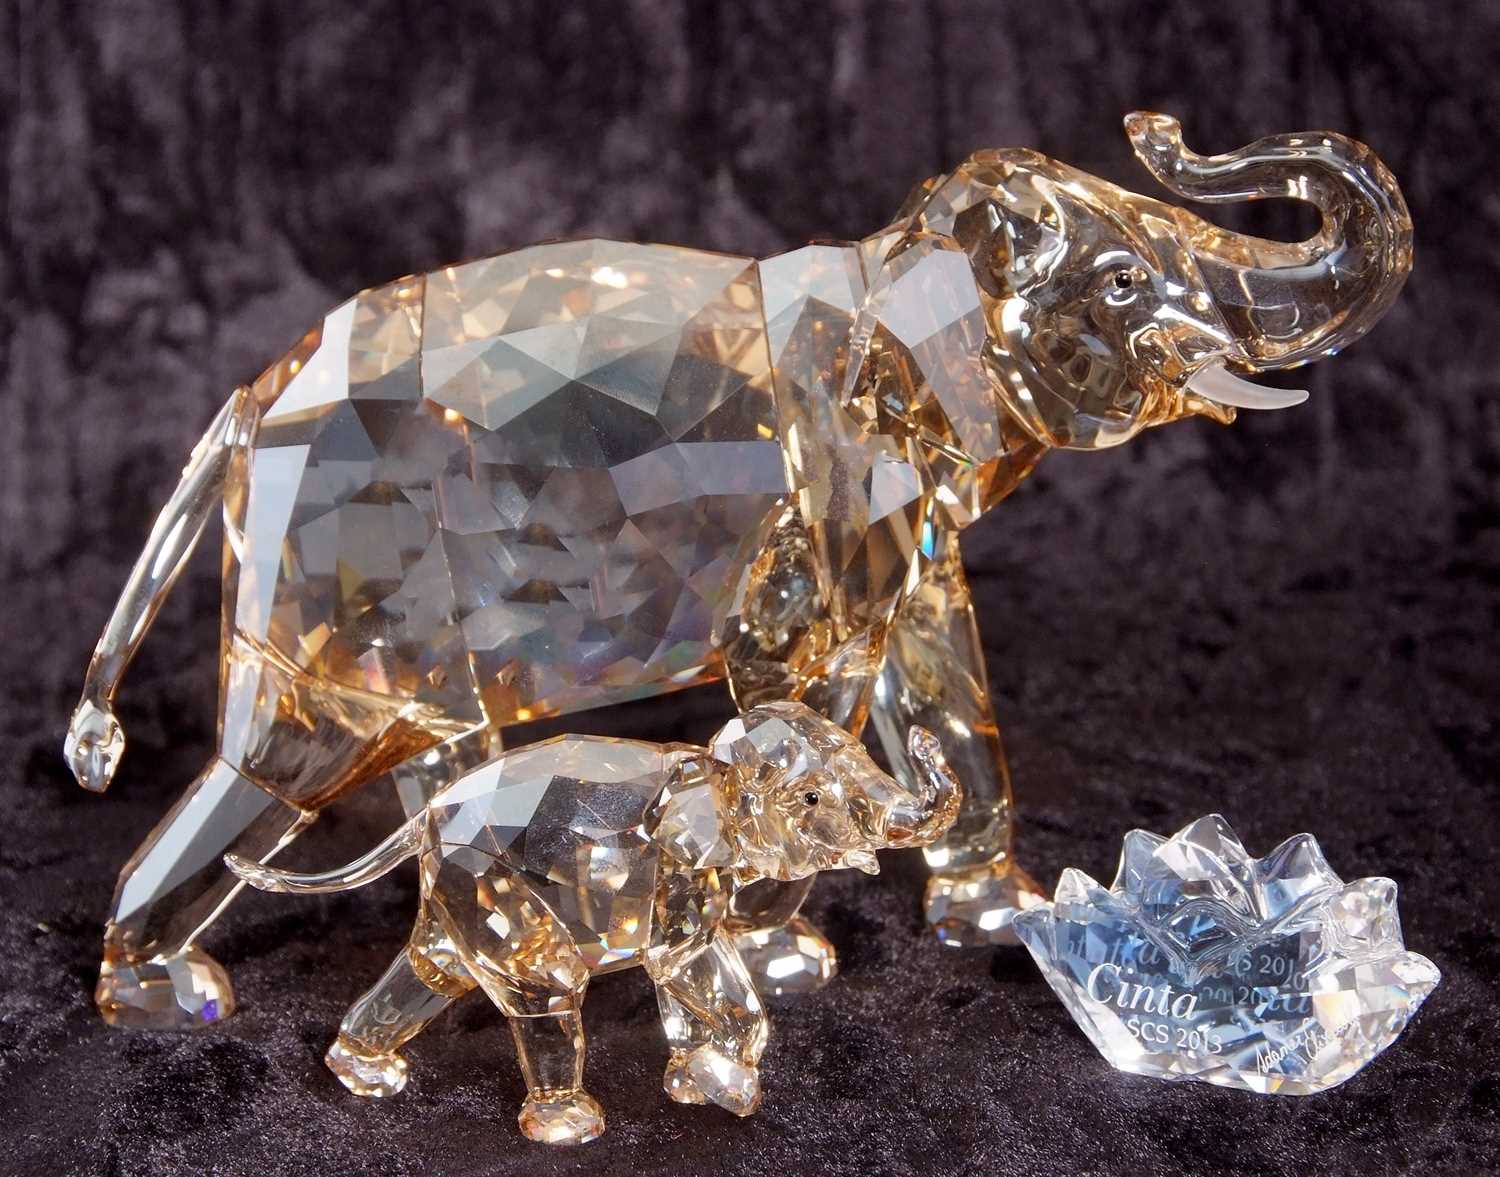 A Swarovski SCS annual edition figure of Cinta elephant together with a baby elephant, 2013, with - Image 7 of 11